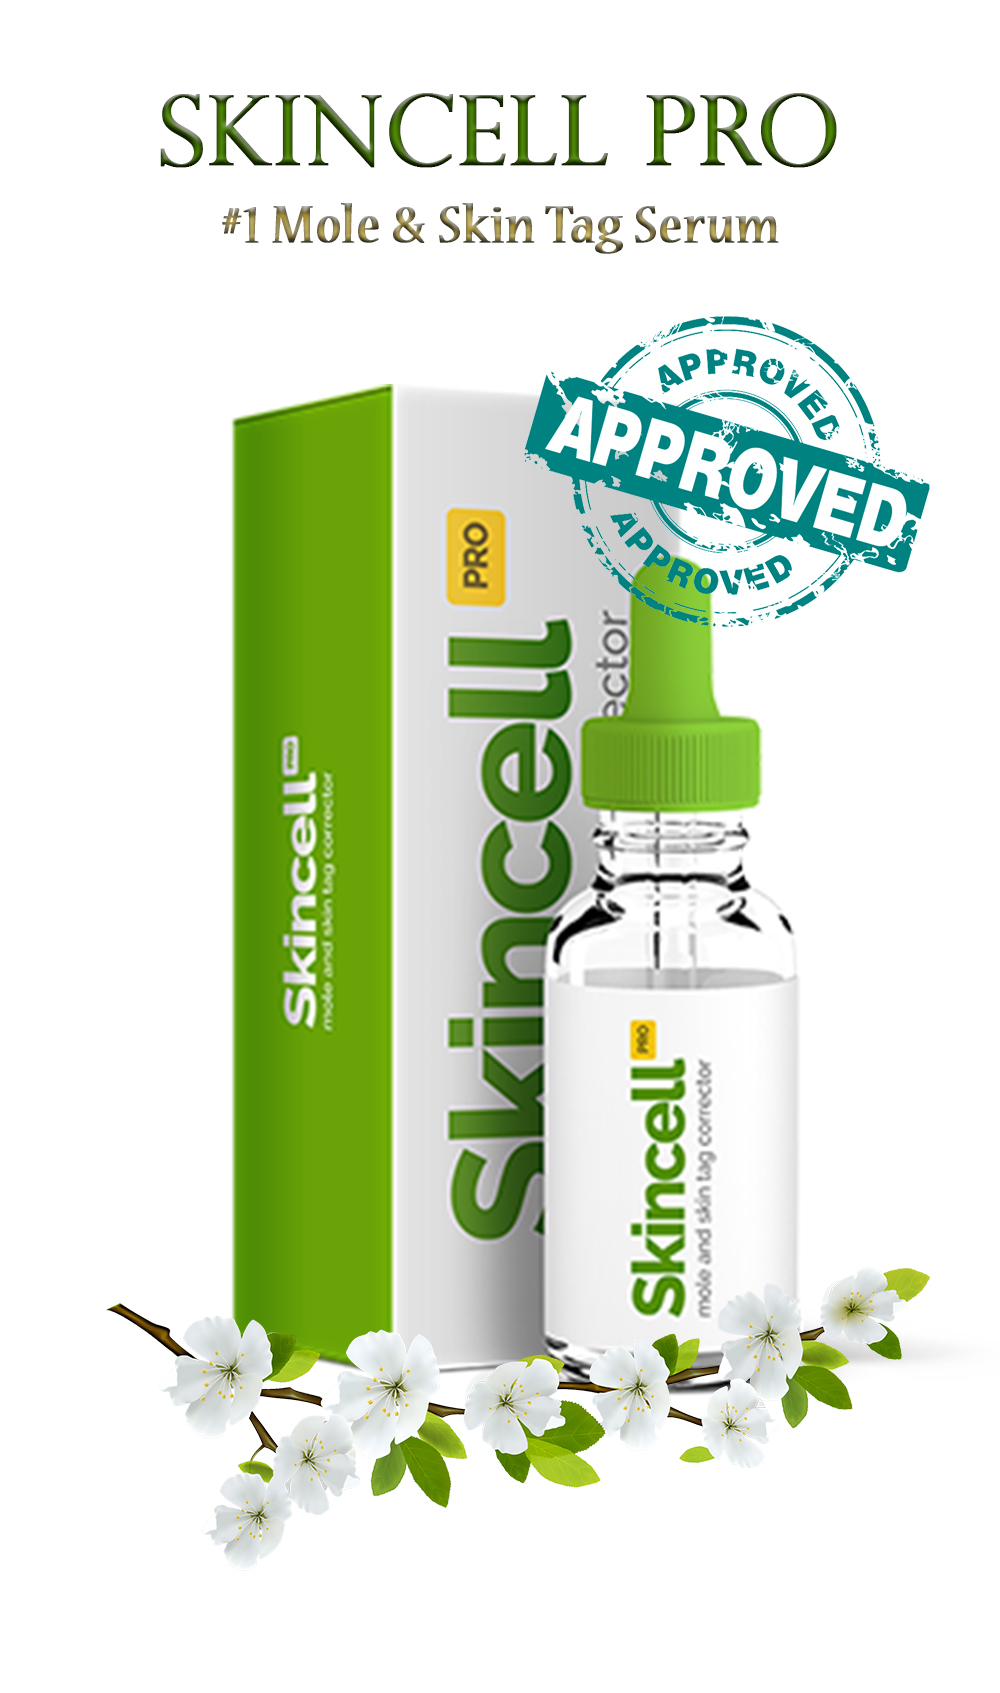 Skincell Pro benefits